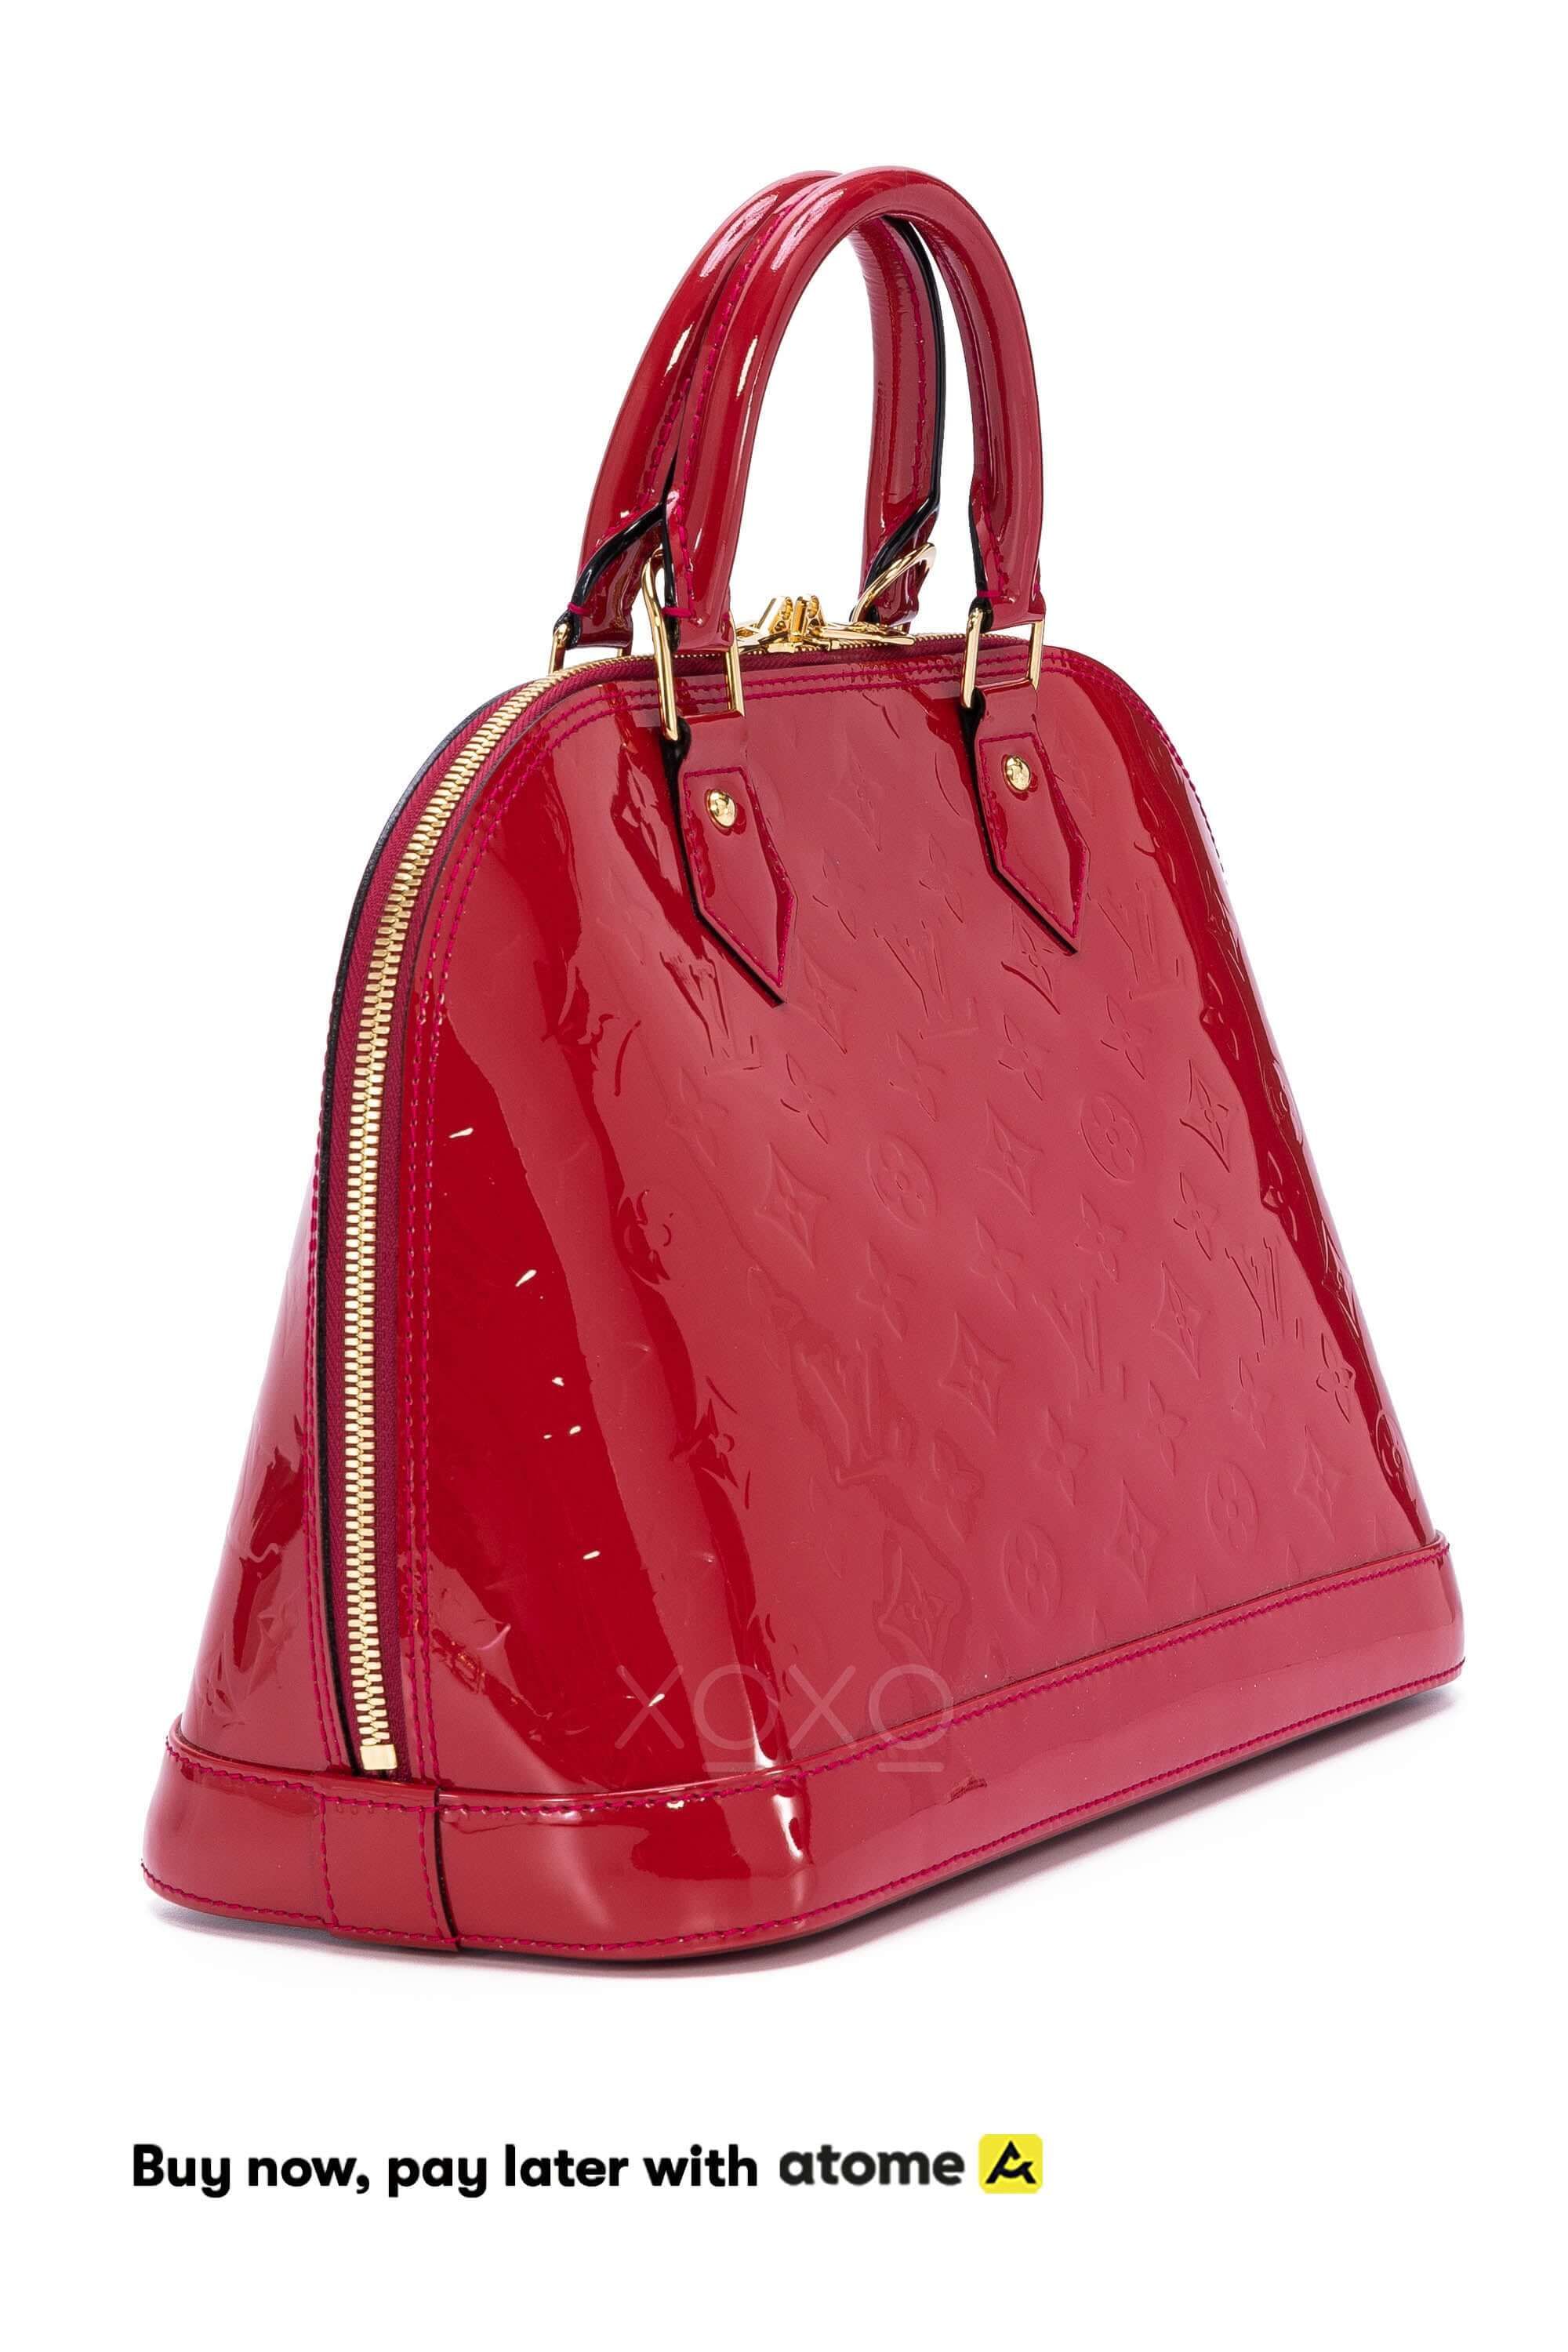 Louis Vuitton Alma PM Red Bag – Curated by Charbel